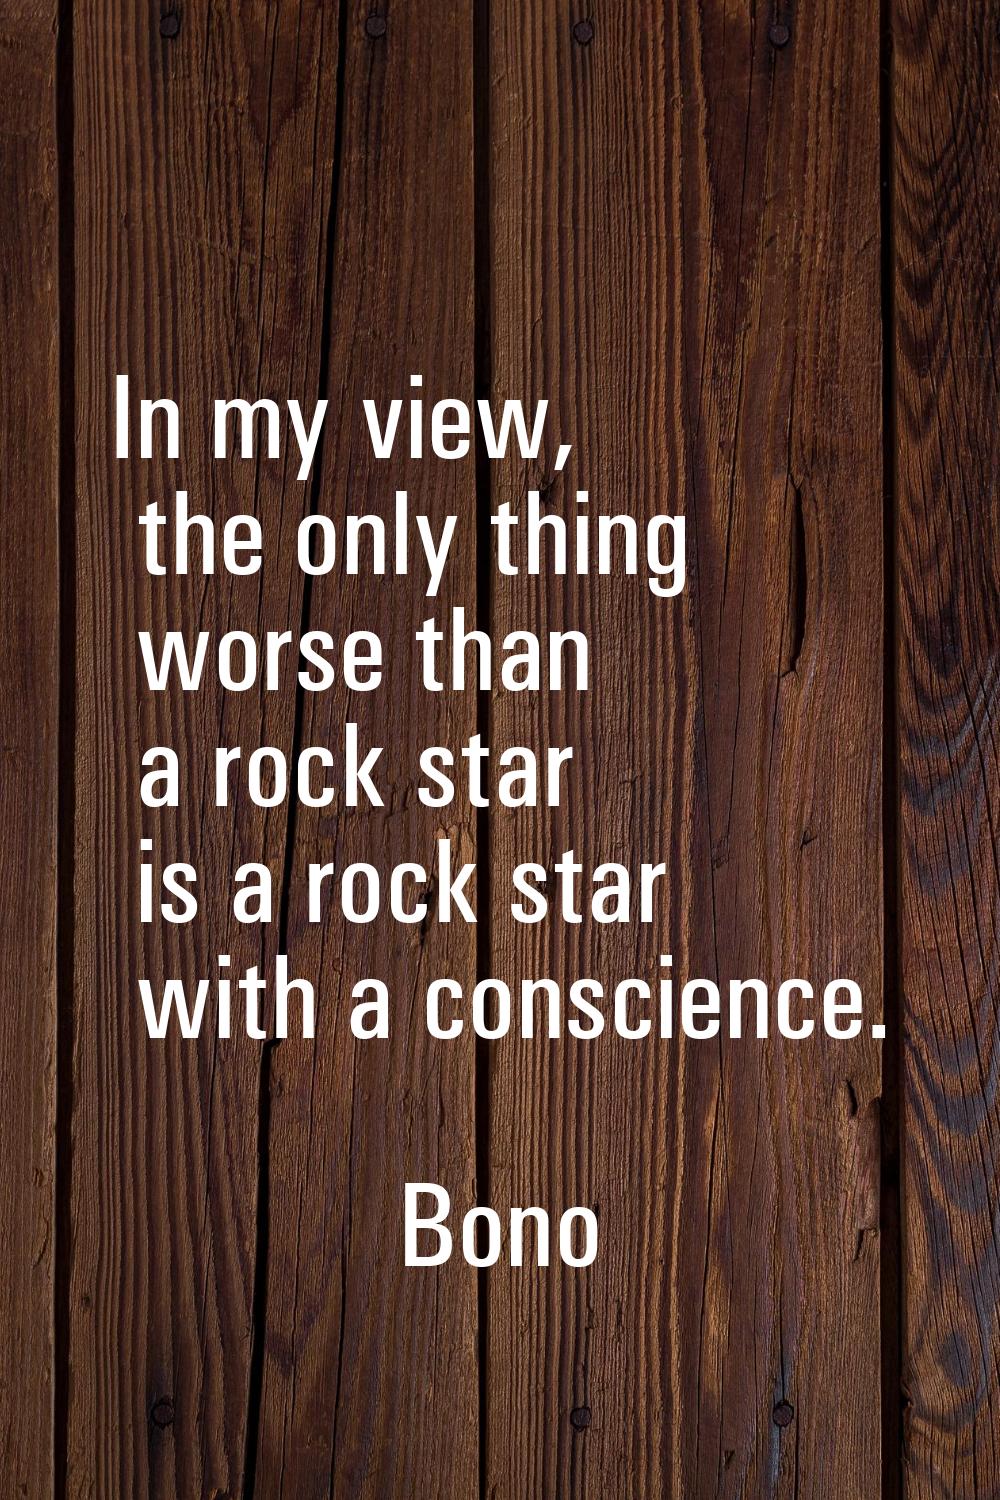 In my view, the only thing worse than a rock star is a rock star with a conscience.